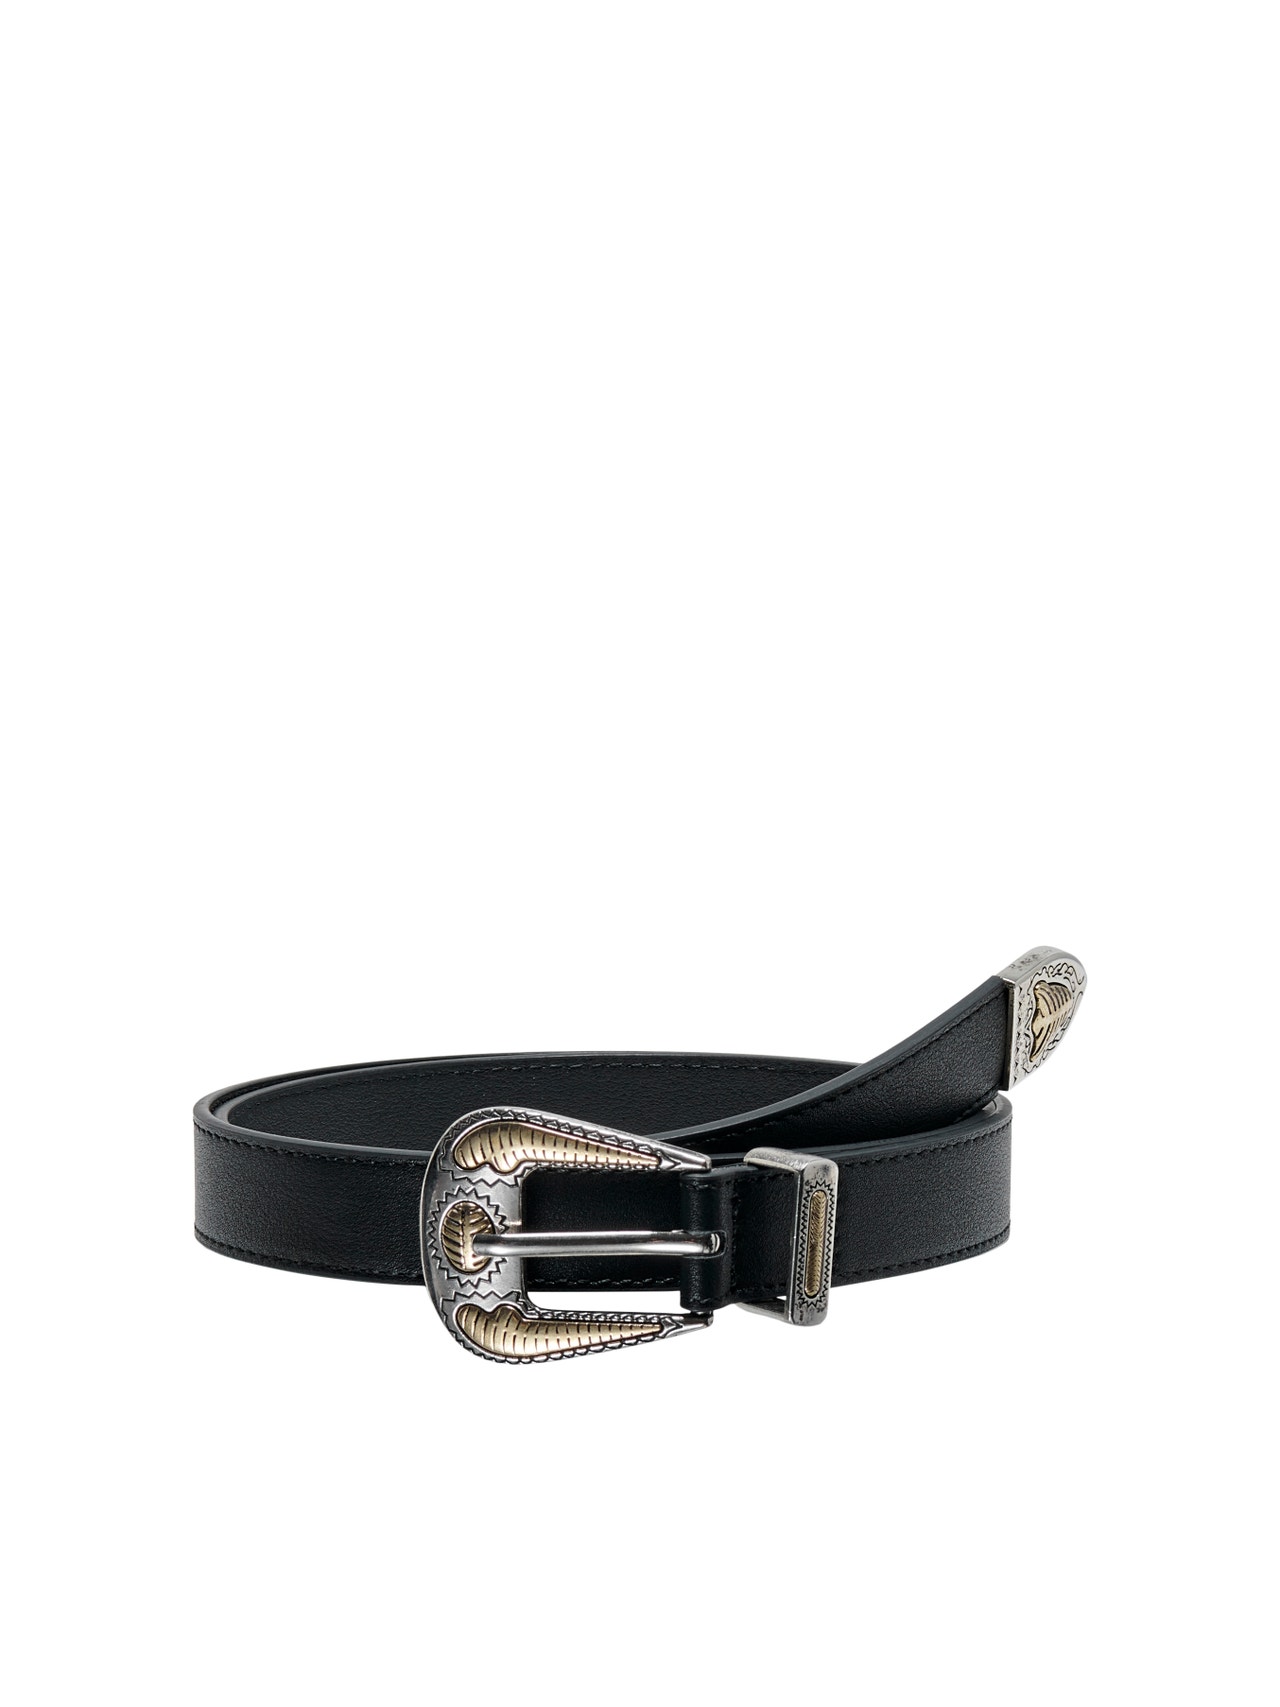 ONLY Faux leather Belt -Black - 15300882